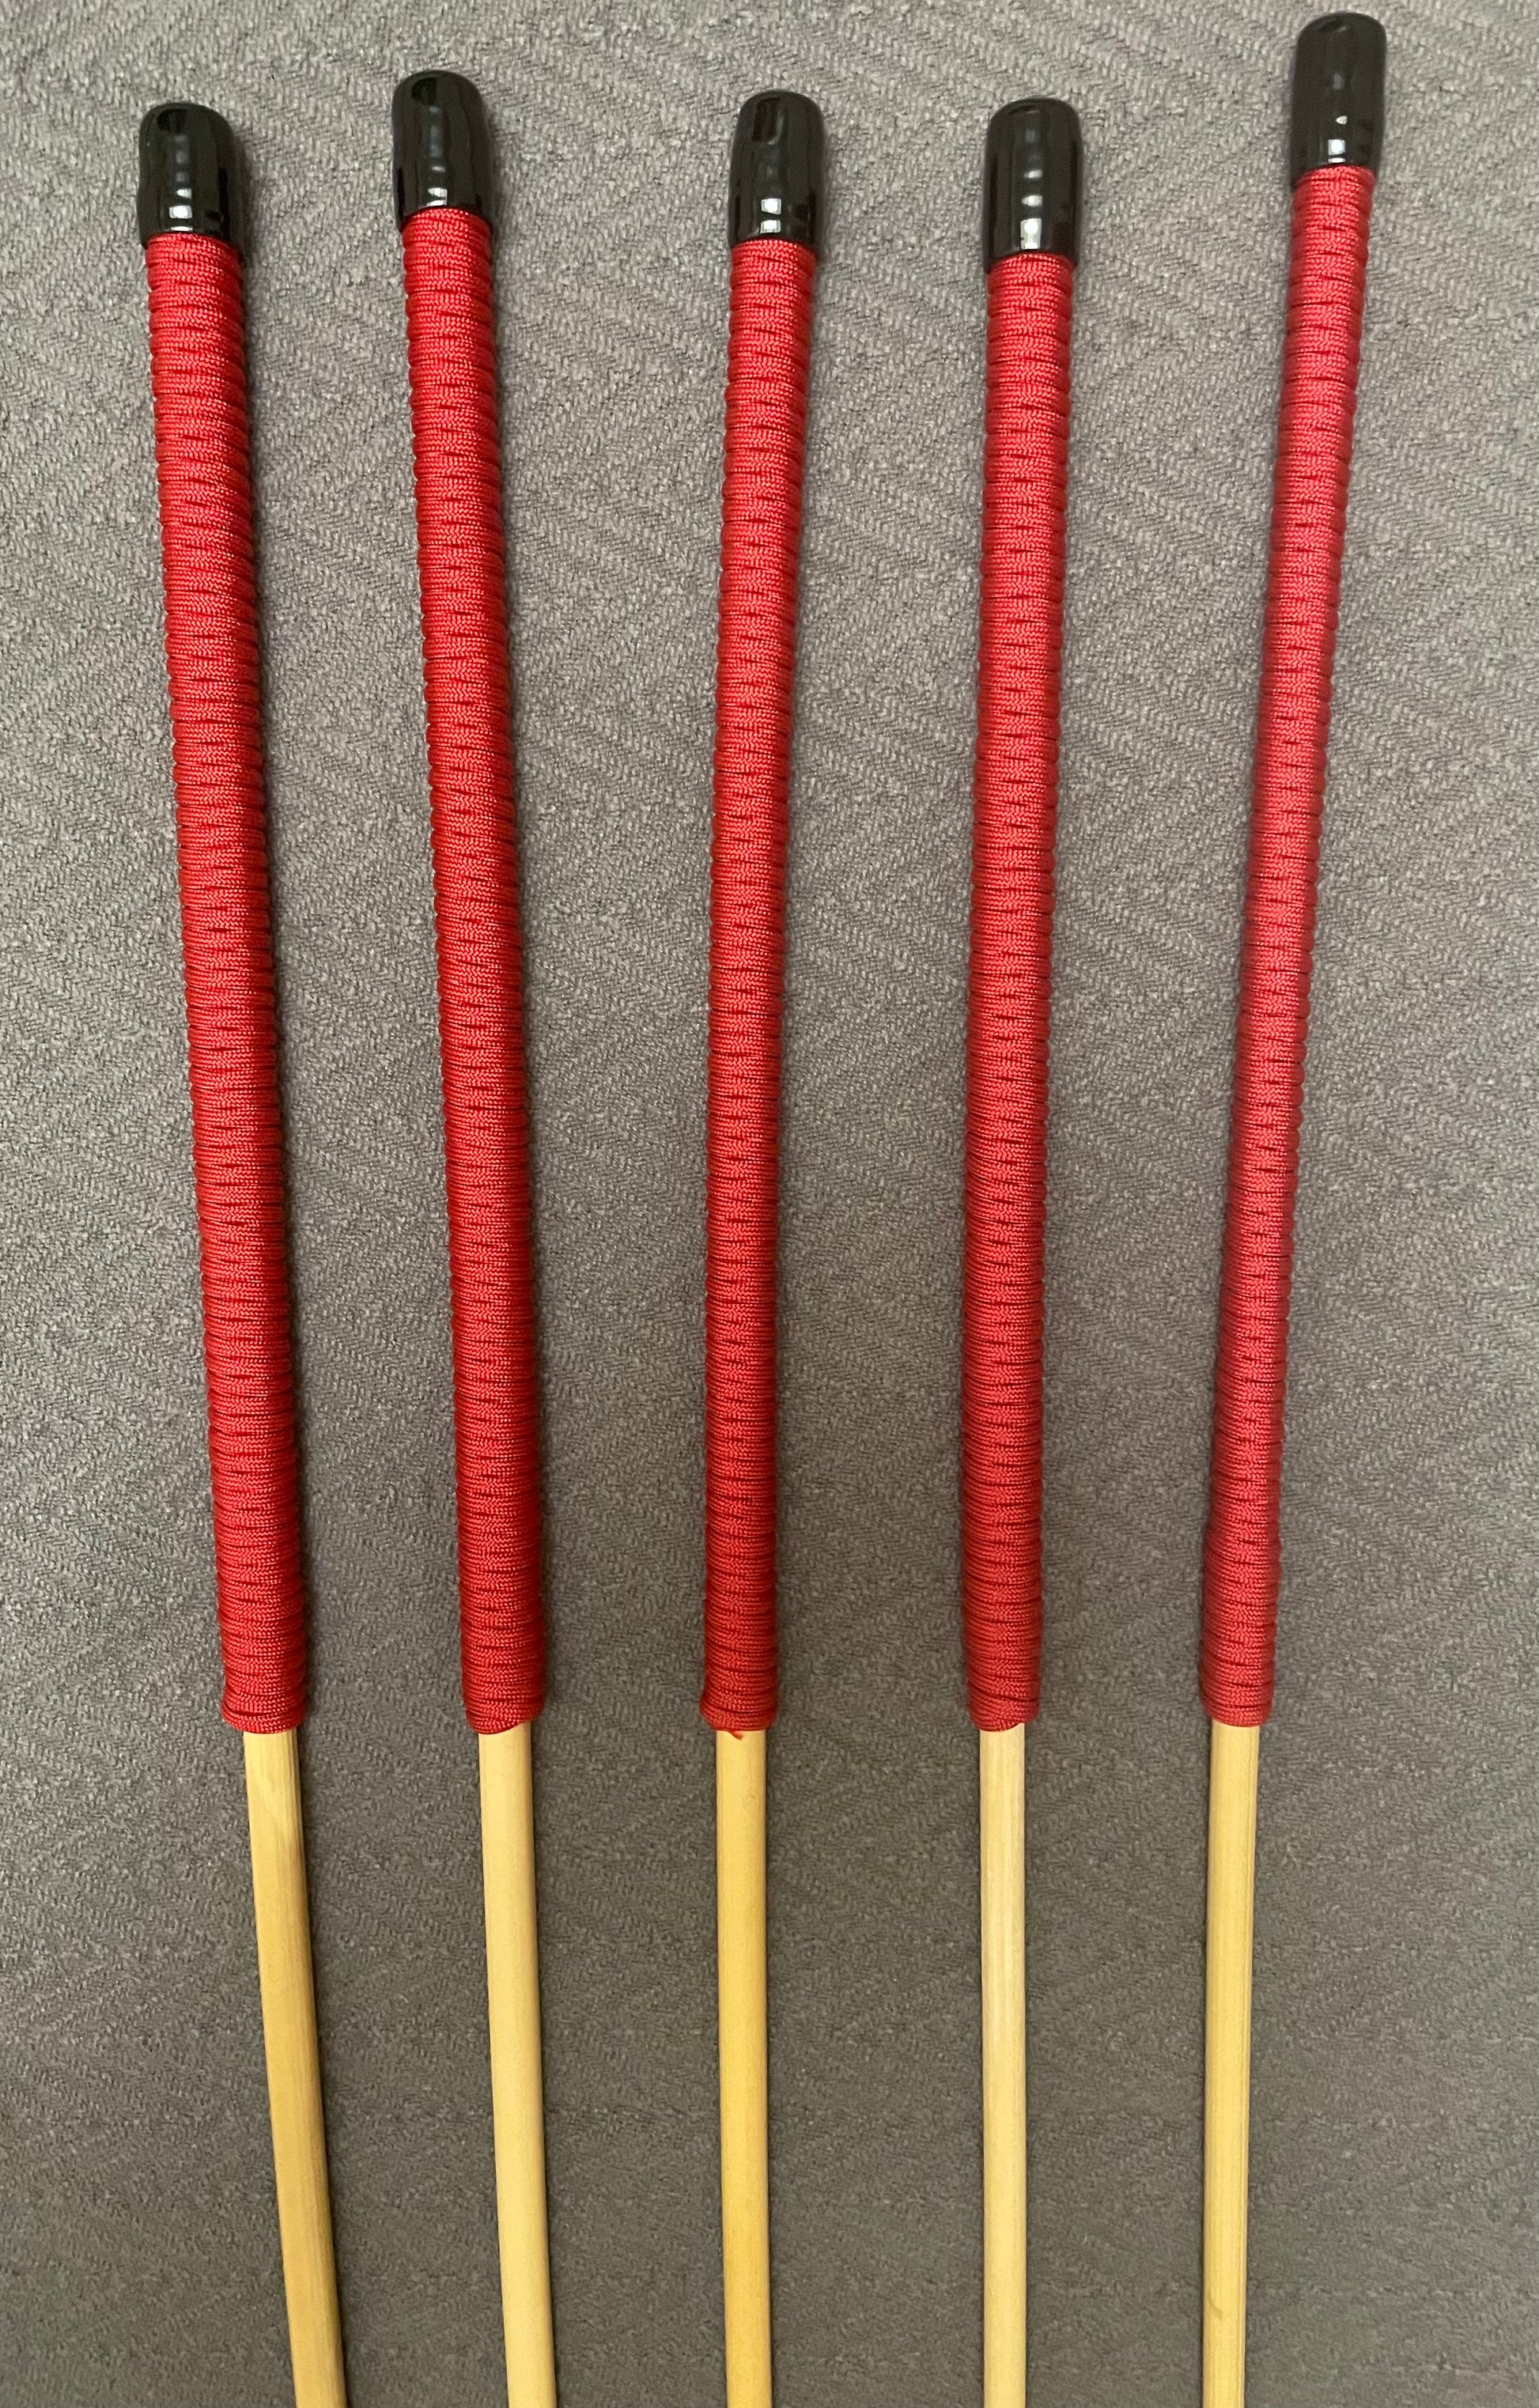 Set of 5 Knotless Dragon Canes / Ultimate Canes / No Knot Canes / BDSM Canes - 90 to 92 cms Length - Imperial Red Paracord Handles